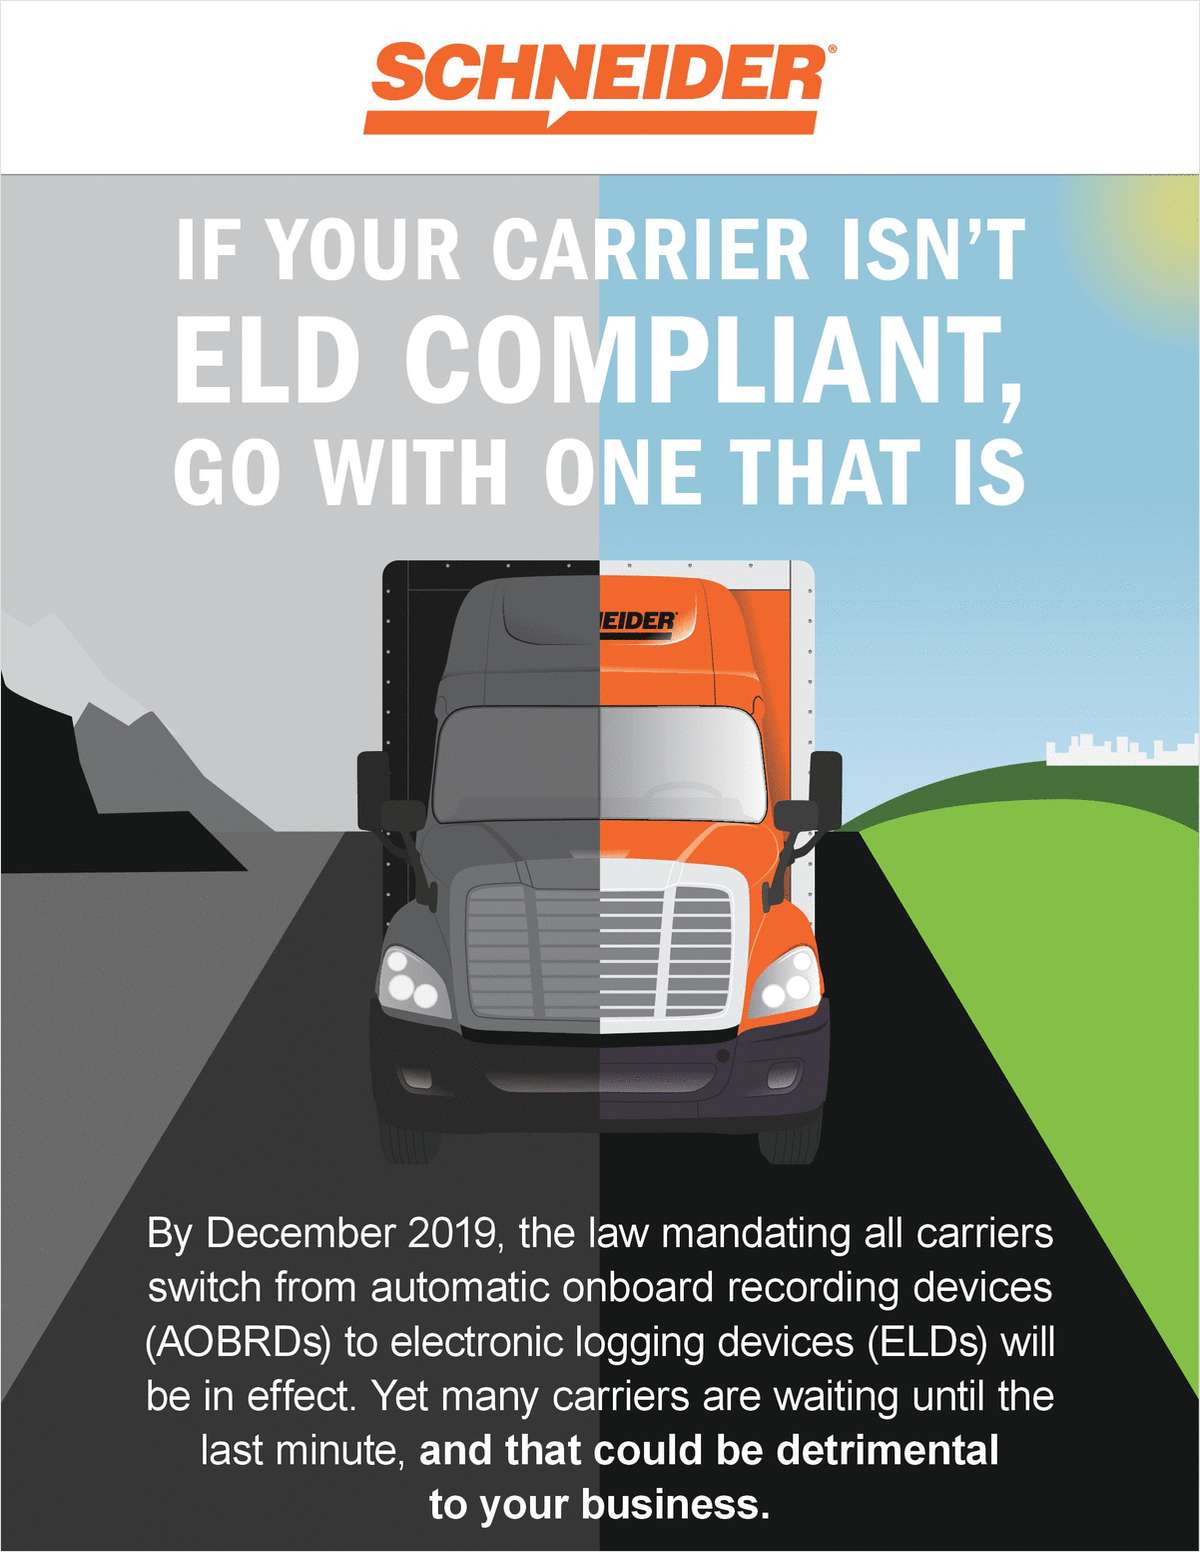 If Your Carrier Isn't ELD Compliant, Go with One That Is